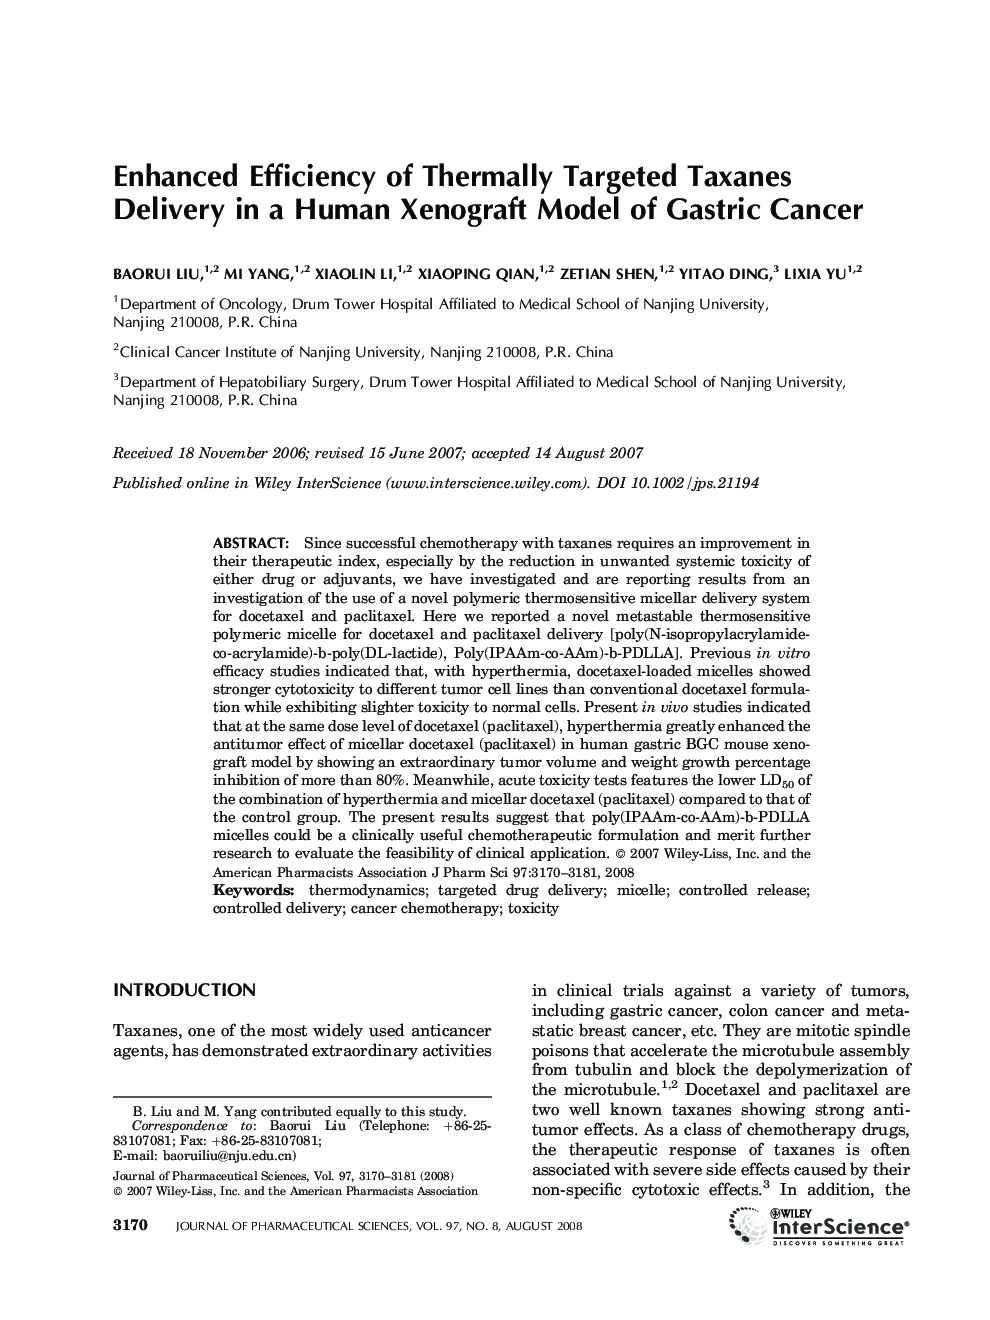 Enhanced Efficiency of Thermally Targeted Taxanes Delivery in a Human Xenograft Model of Gastric Cancer